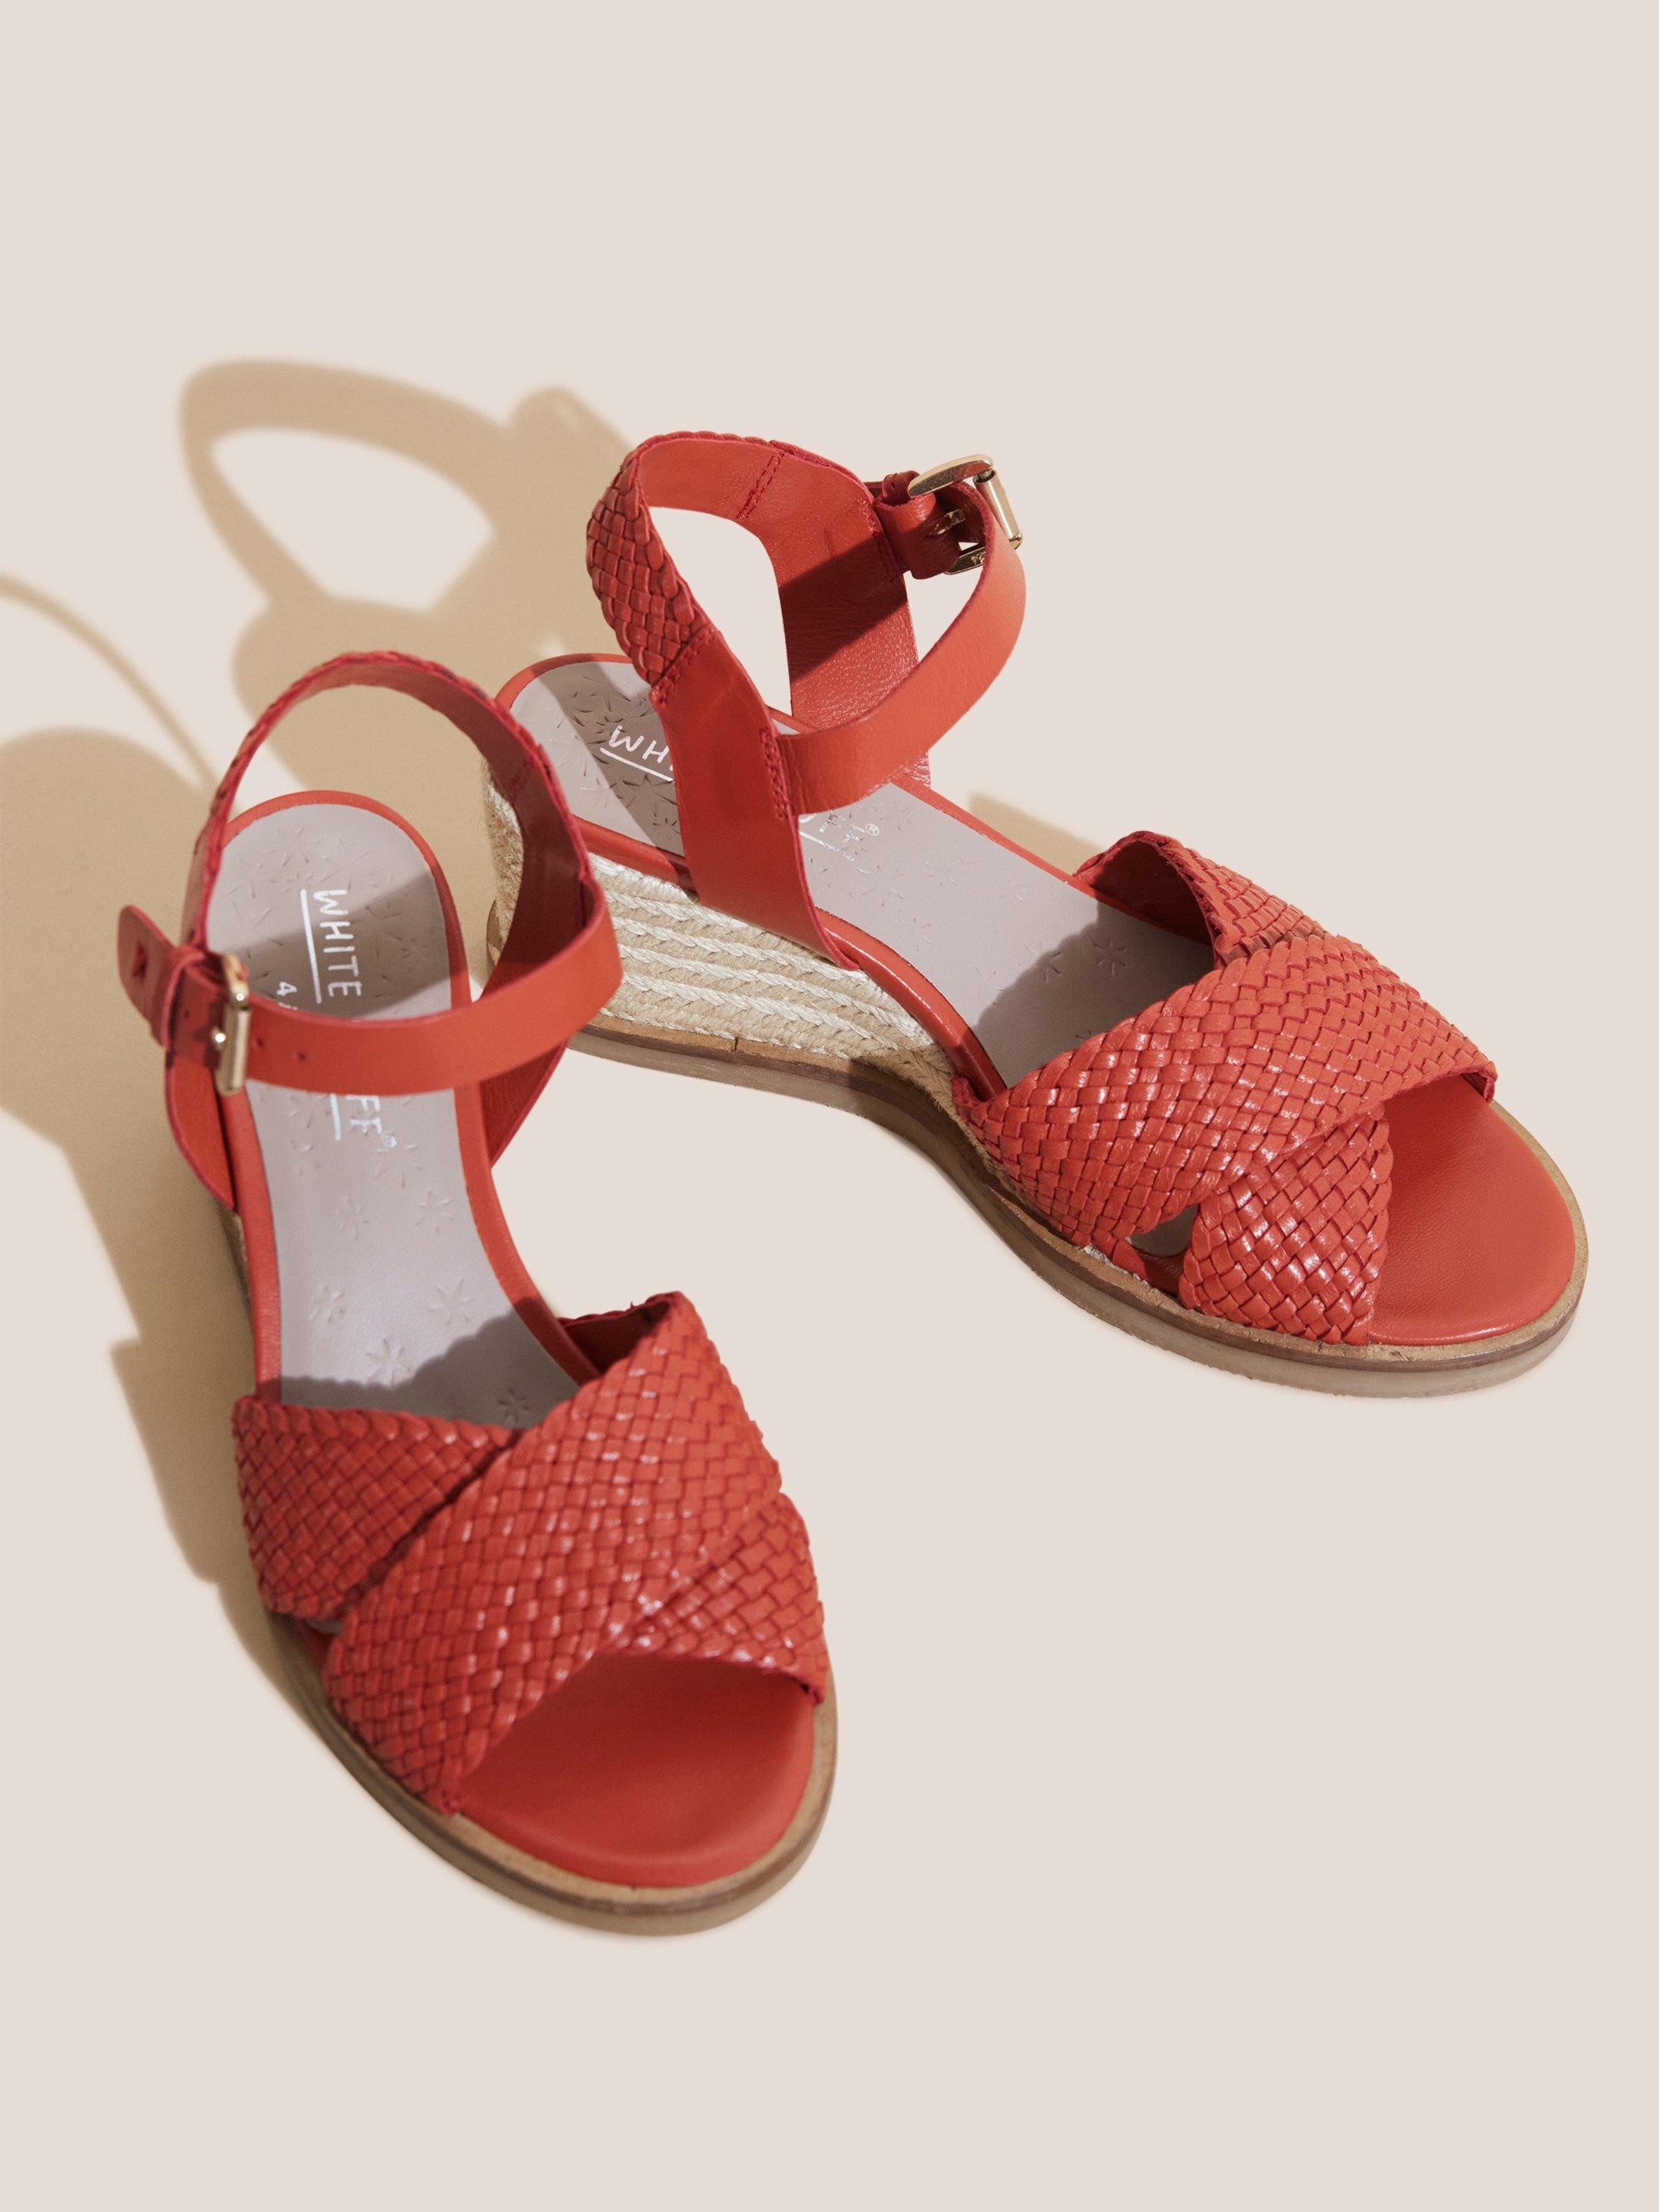 Leather Wedge Woven Sandal in BRT ORANGE - FLAT FRONT